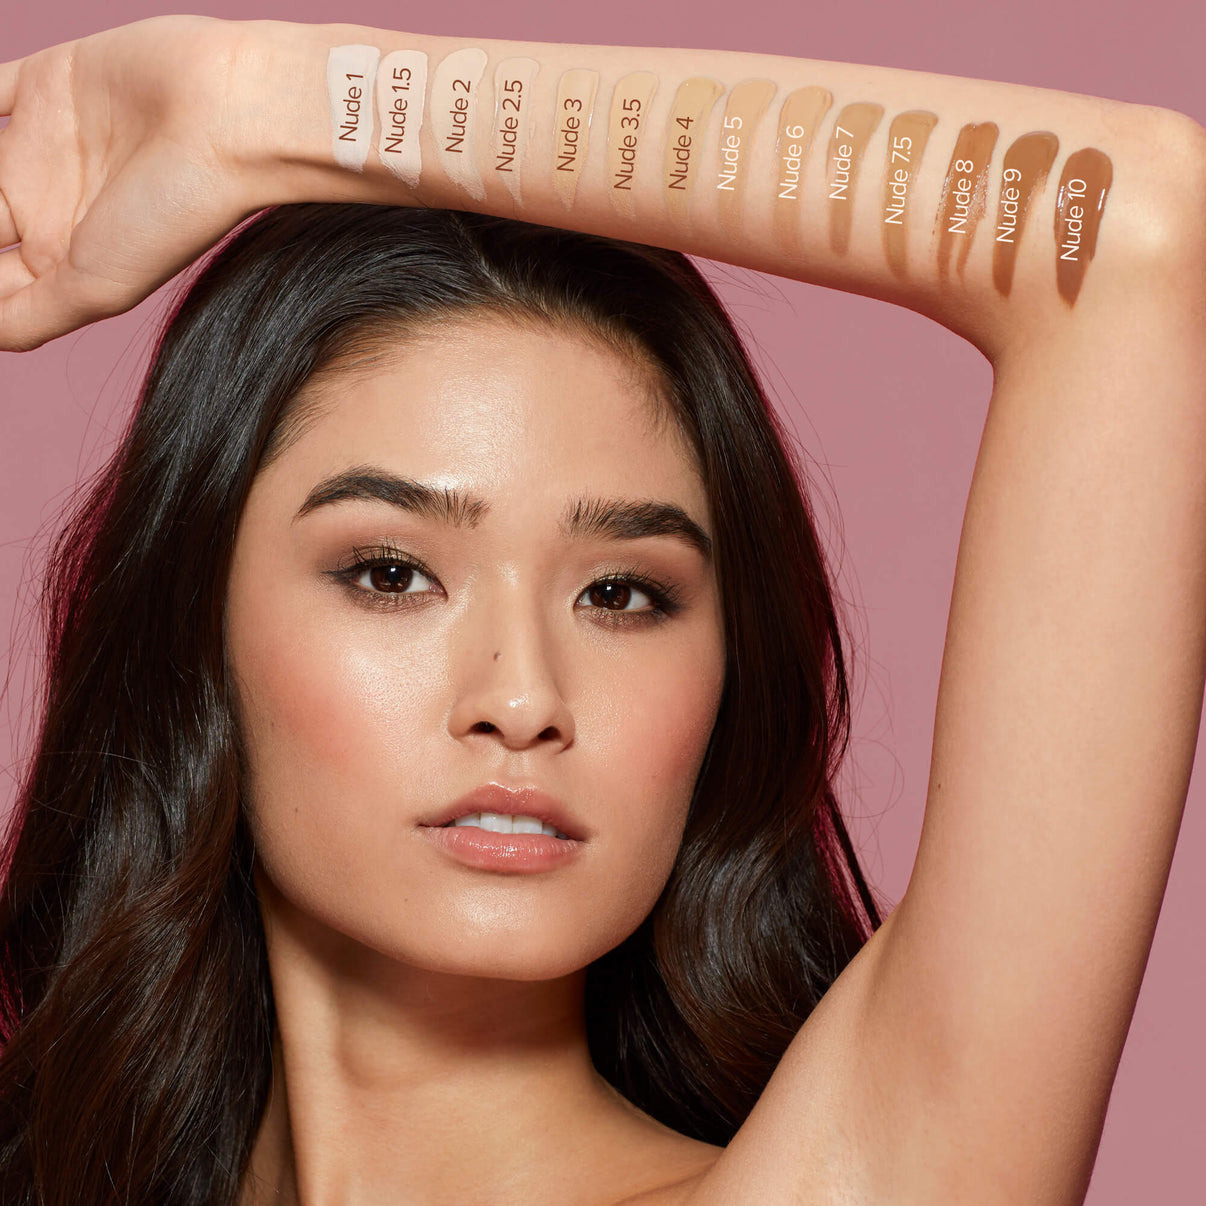 Young woman with swatches on her arm of Tinted Cover nude 8 and other shades